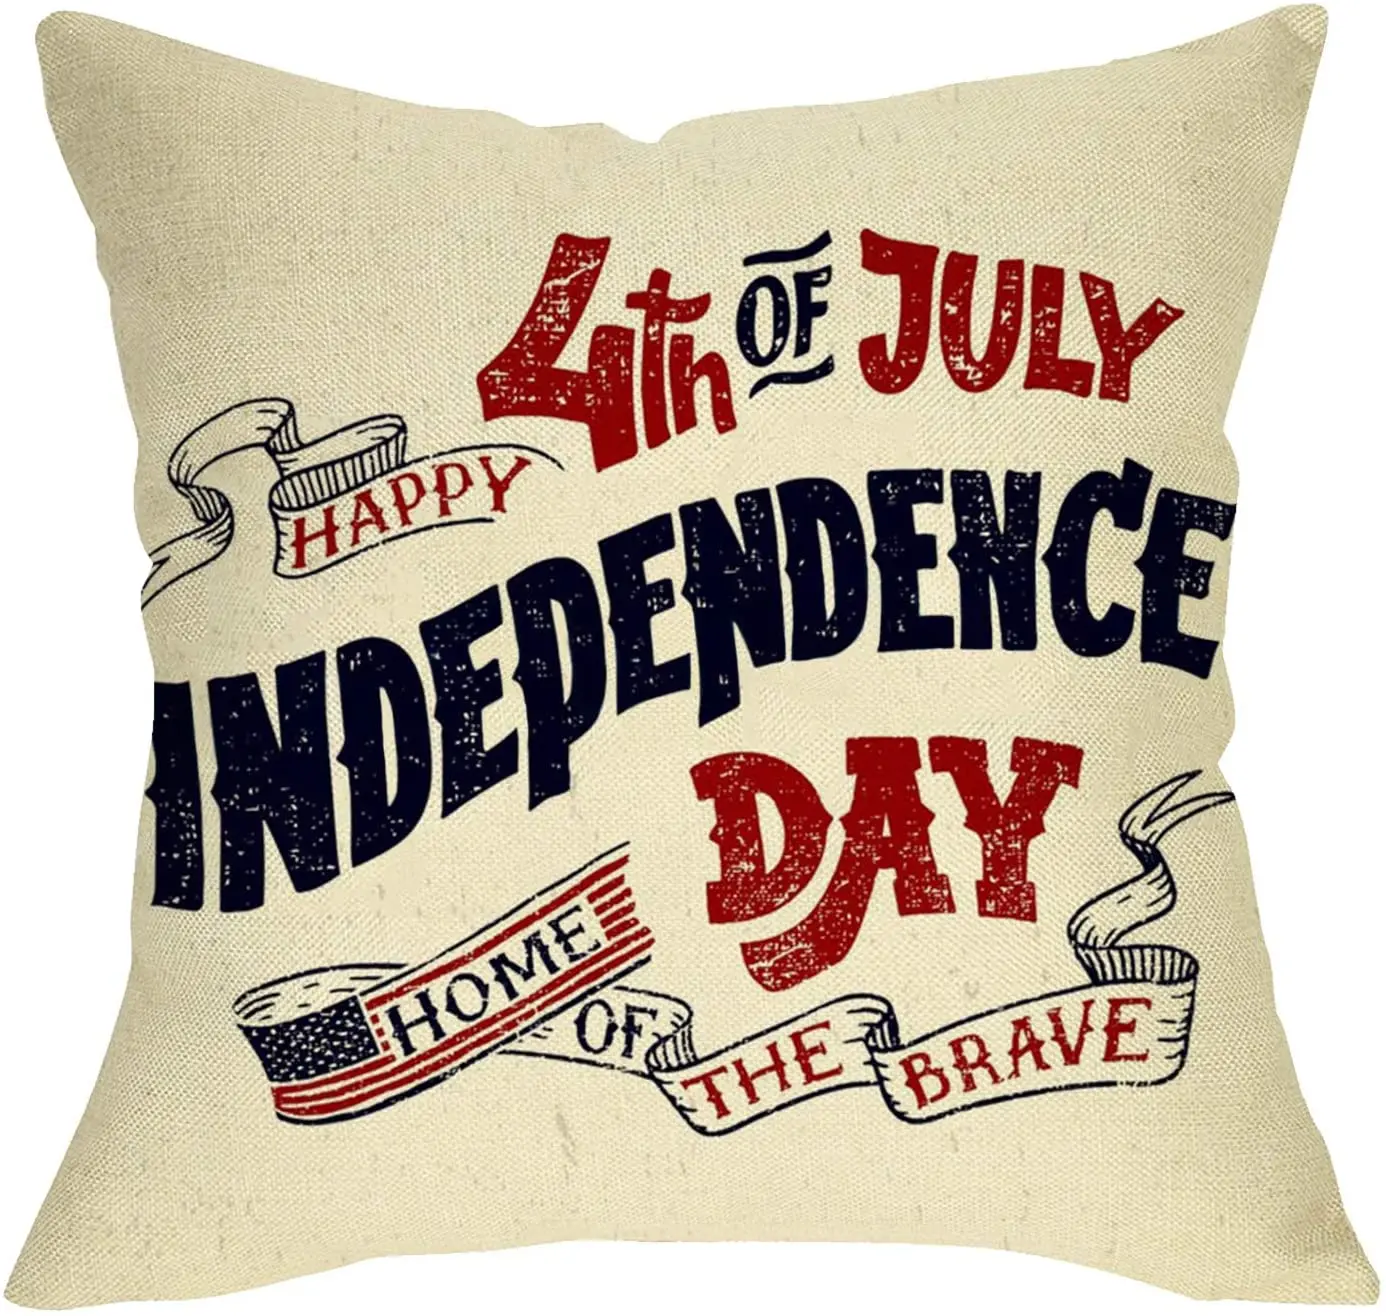 

Softxpp Happy 4th of July Decorative Throw Pillow Cover, USA Independence Day Cushion Case, American Patriotic Home of The Brave